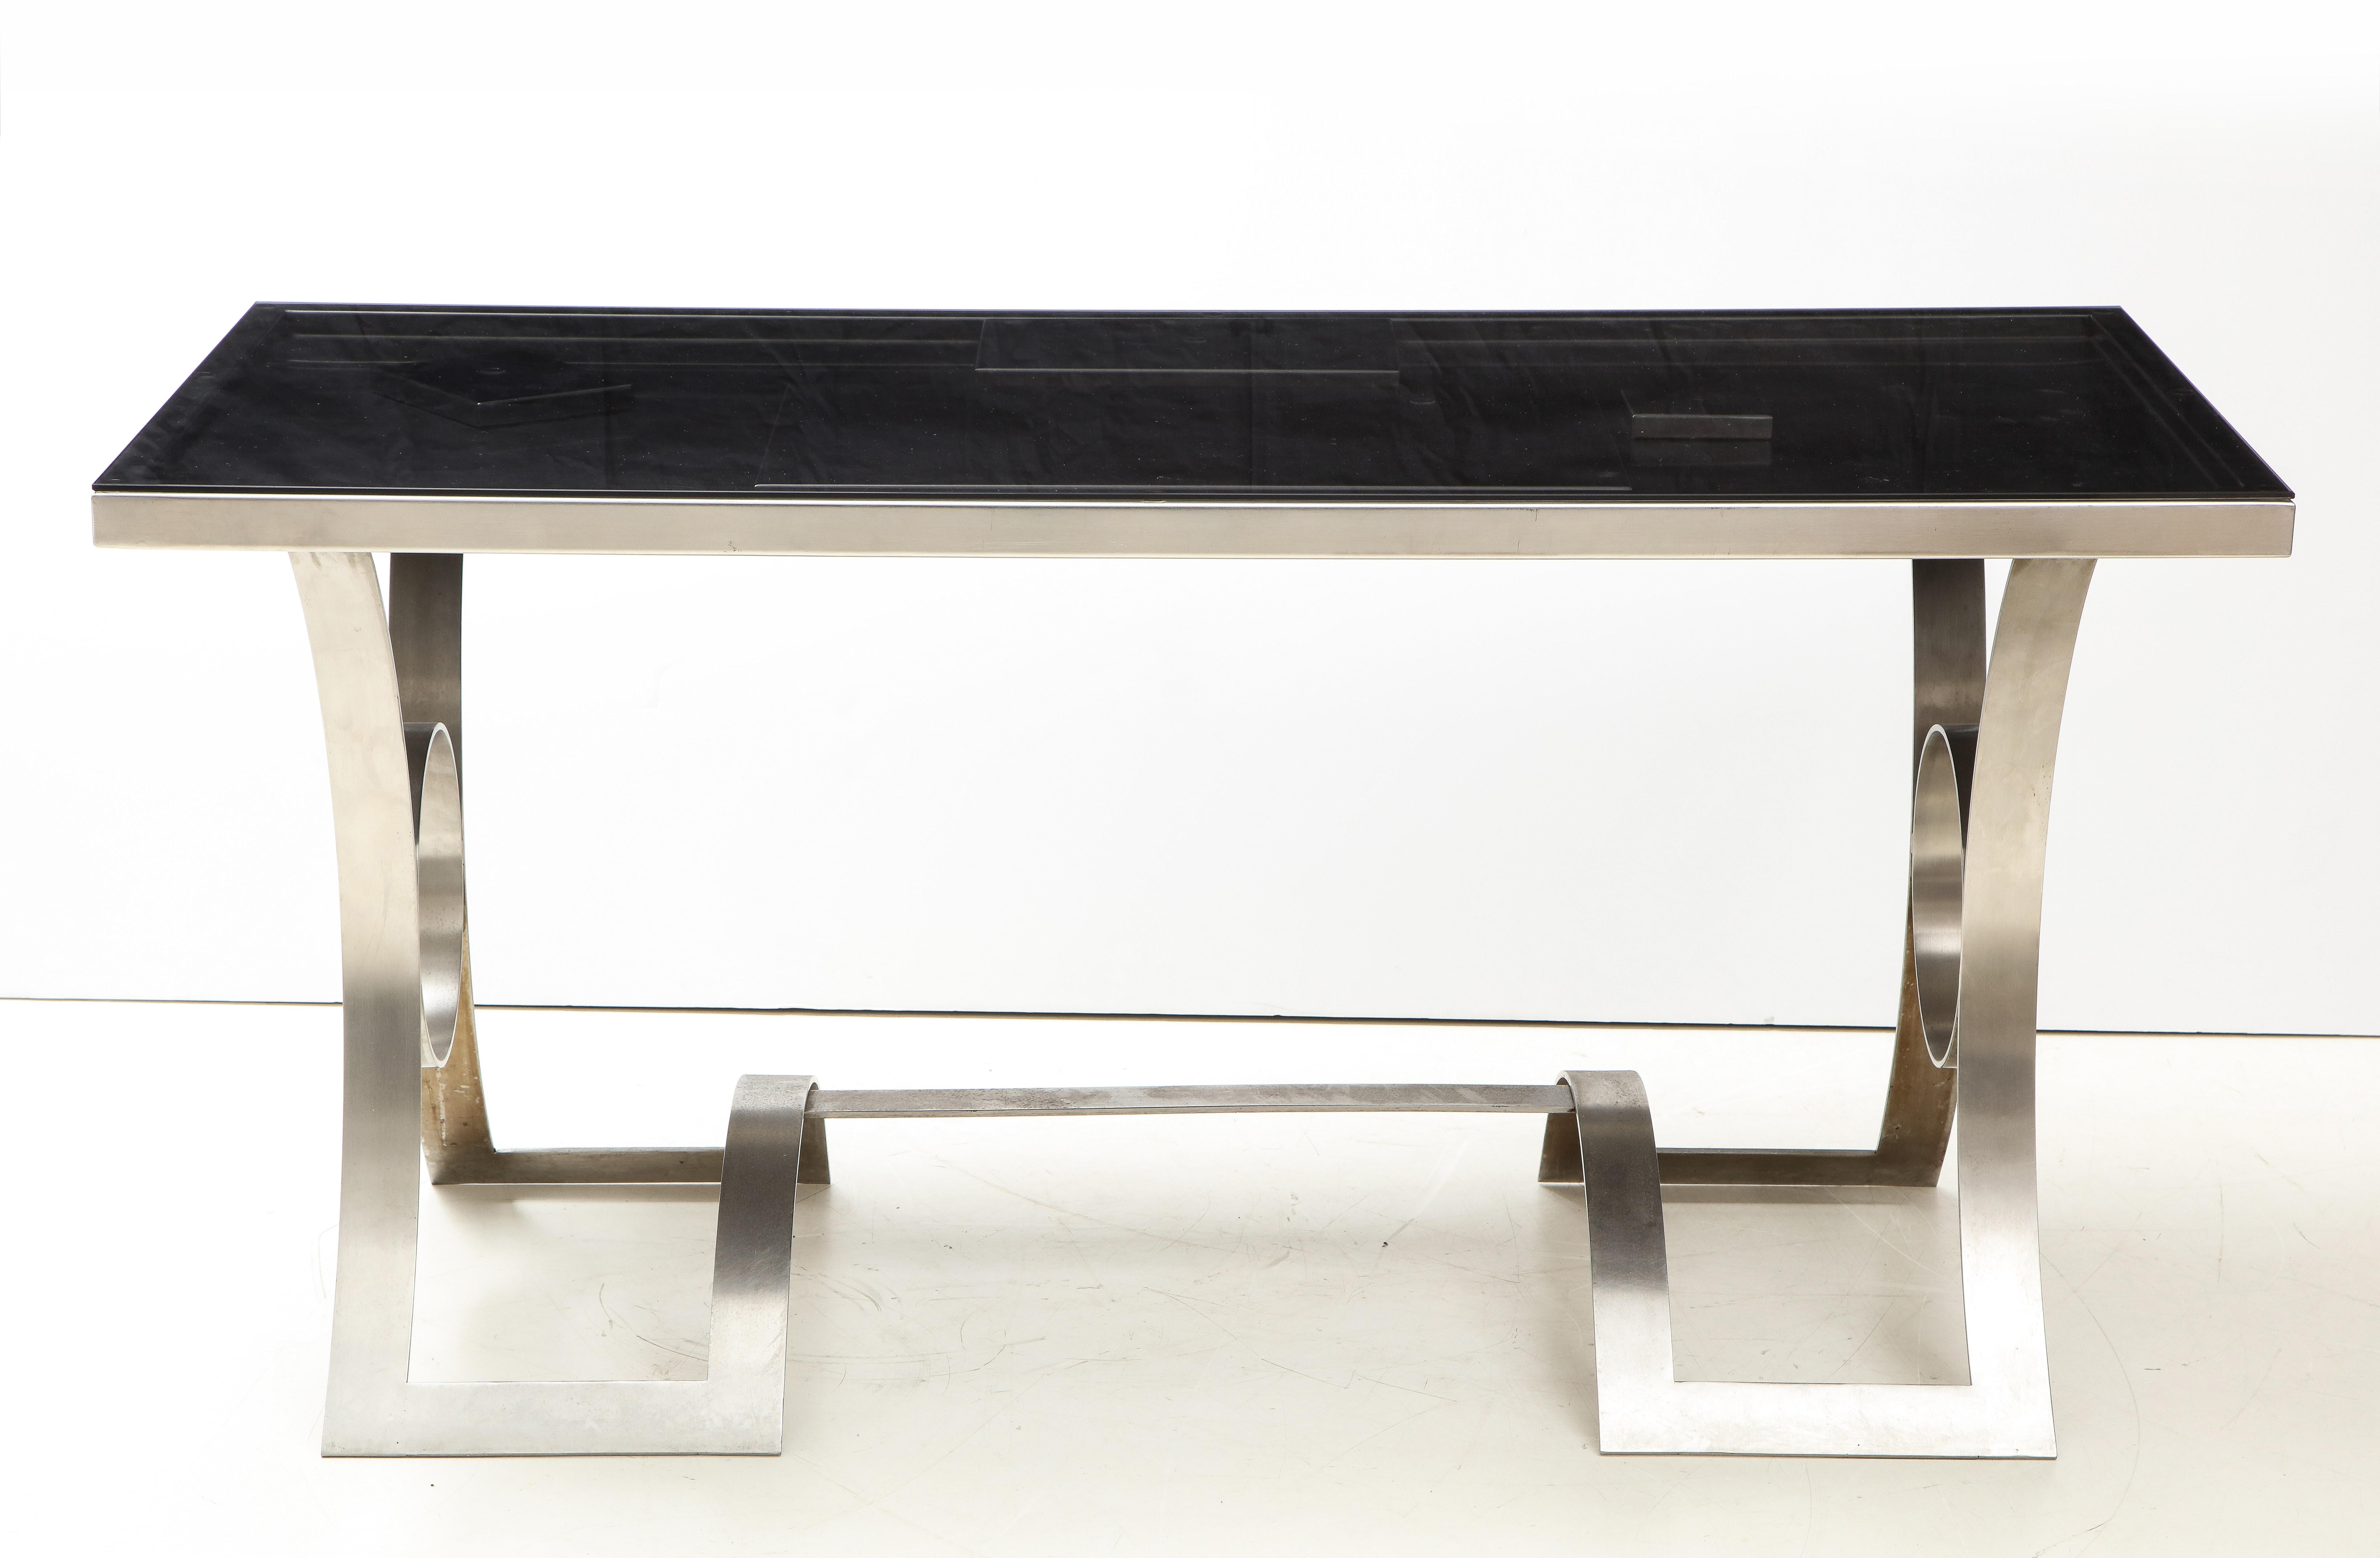 Rare Stainless Steel Desk with Smoked Grey Glass Top, France, c. 1970

This exquisite table sports an undulating, curvilinear base with a custom glass top in a smoked grey finish. 

The last three images picture the surface of the table beneath the